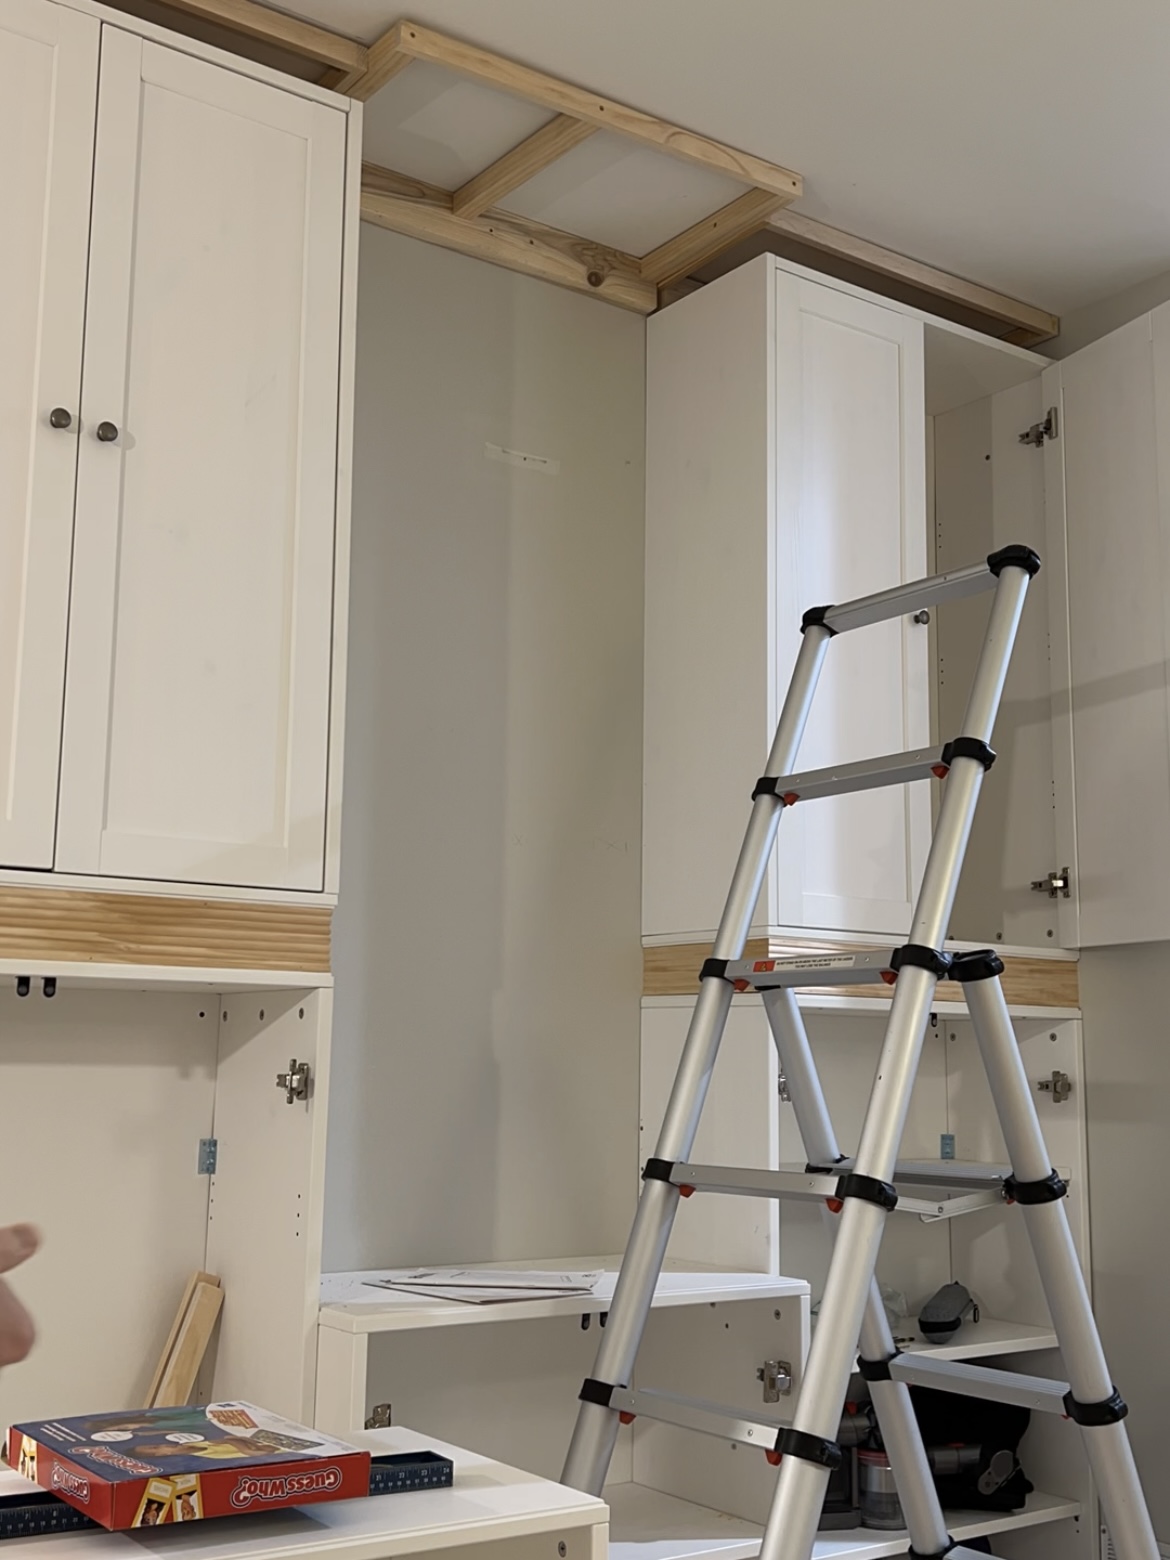 Attaching cabinets together.